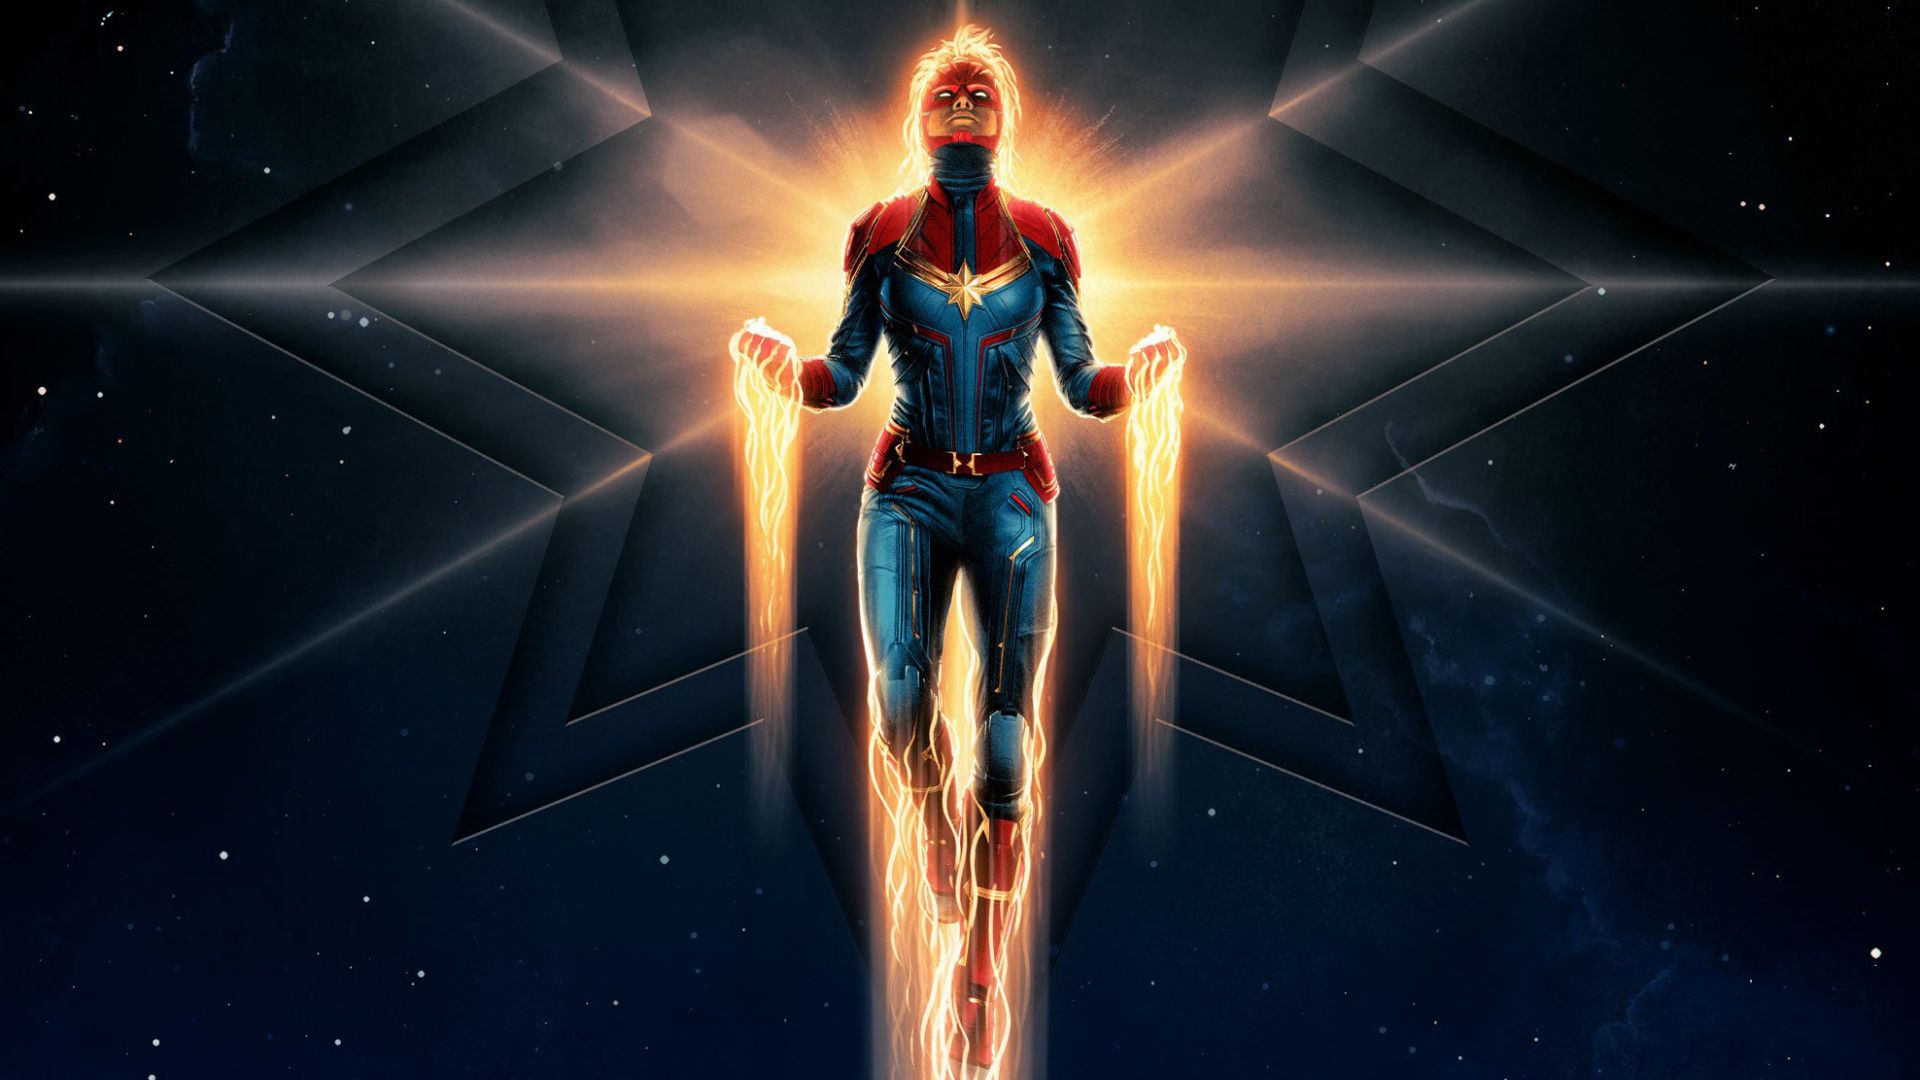 marvel movie wallpaper,joint,human,cg artwork,fictional character,space